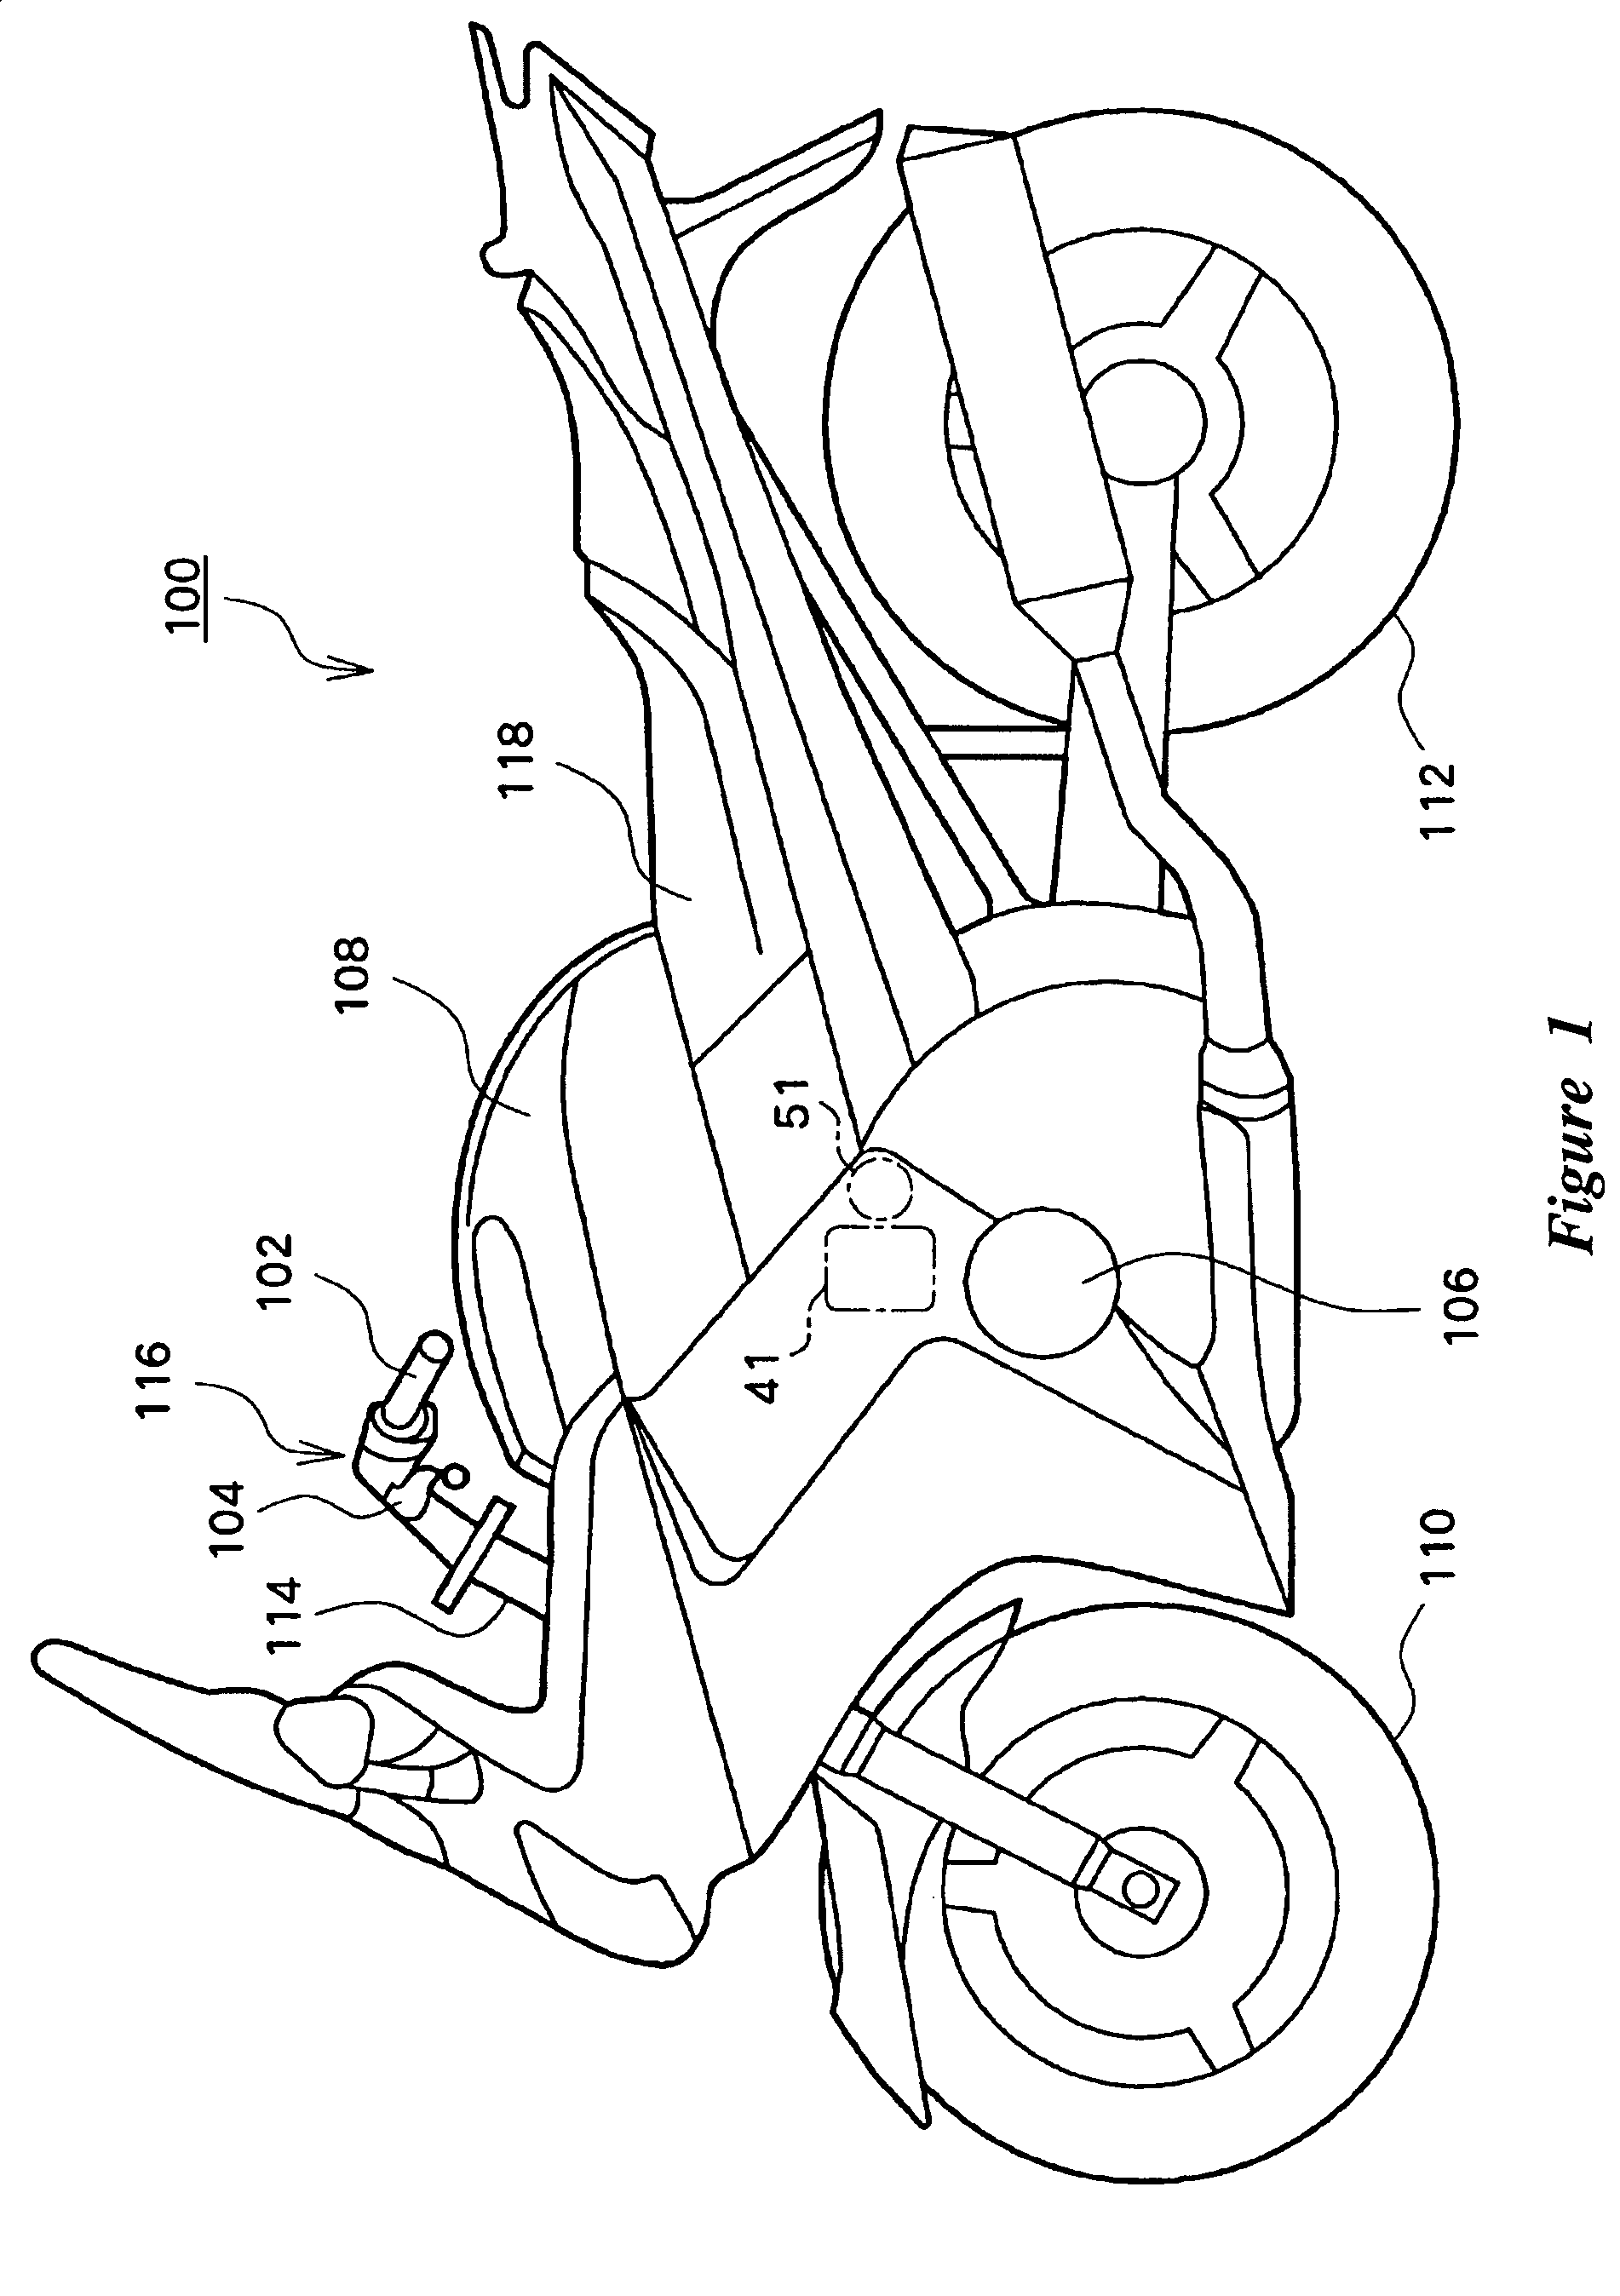 Straddle-type vehicle having clutch engagement control device and method of using clutch engagement control device